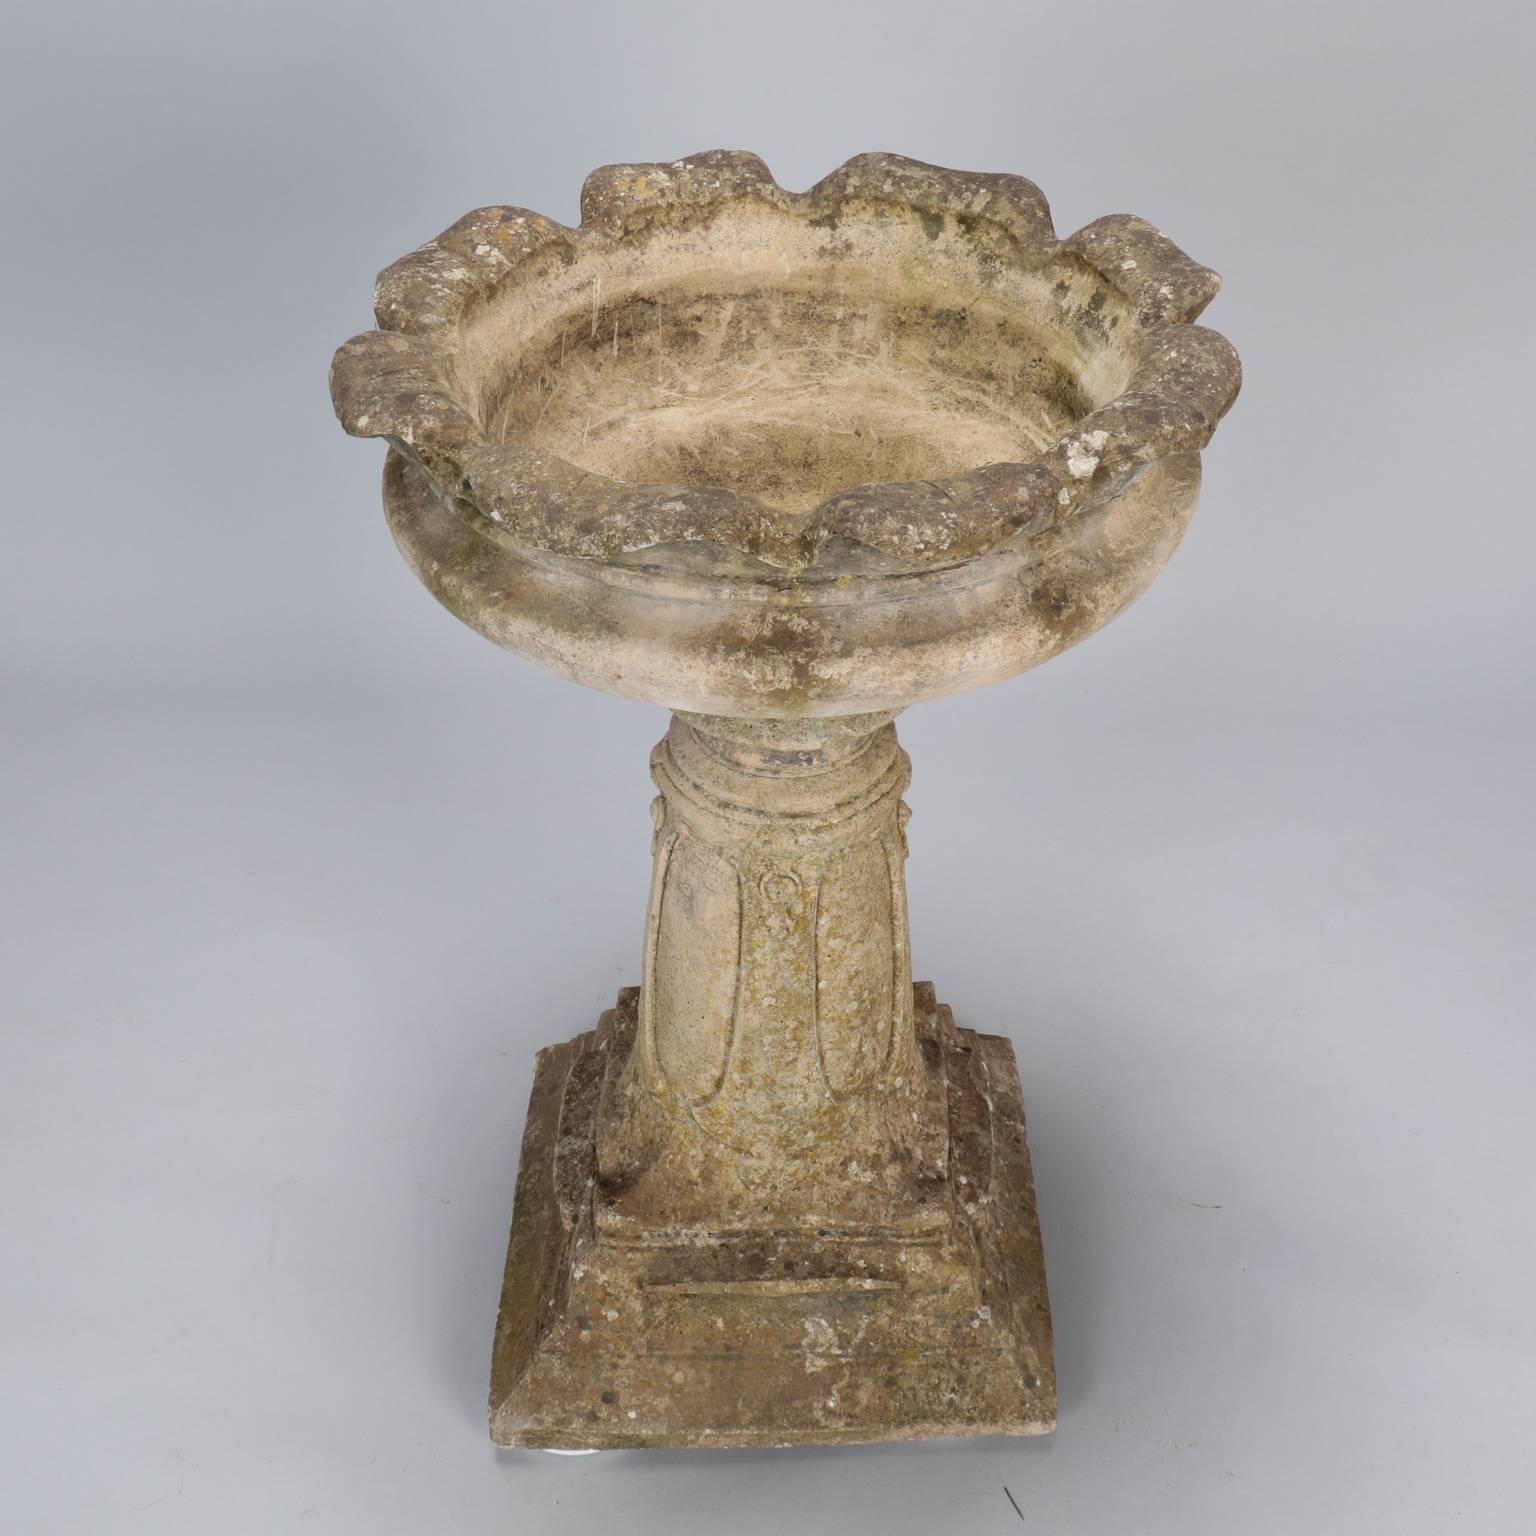 Found in England, this cement bird bath or planter dates from approximately 1900-1910.  Heavy cement base has a removable bowl with fluted edges. Nicely weathered. Some chipping/loss to corner of base and center column - see detail photos. Inner